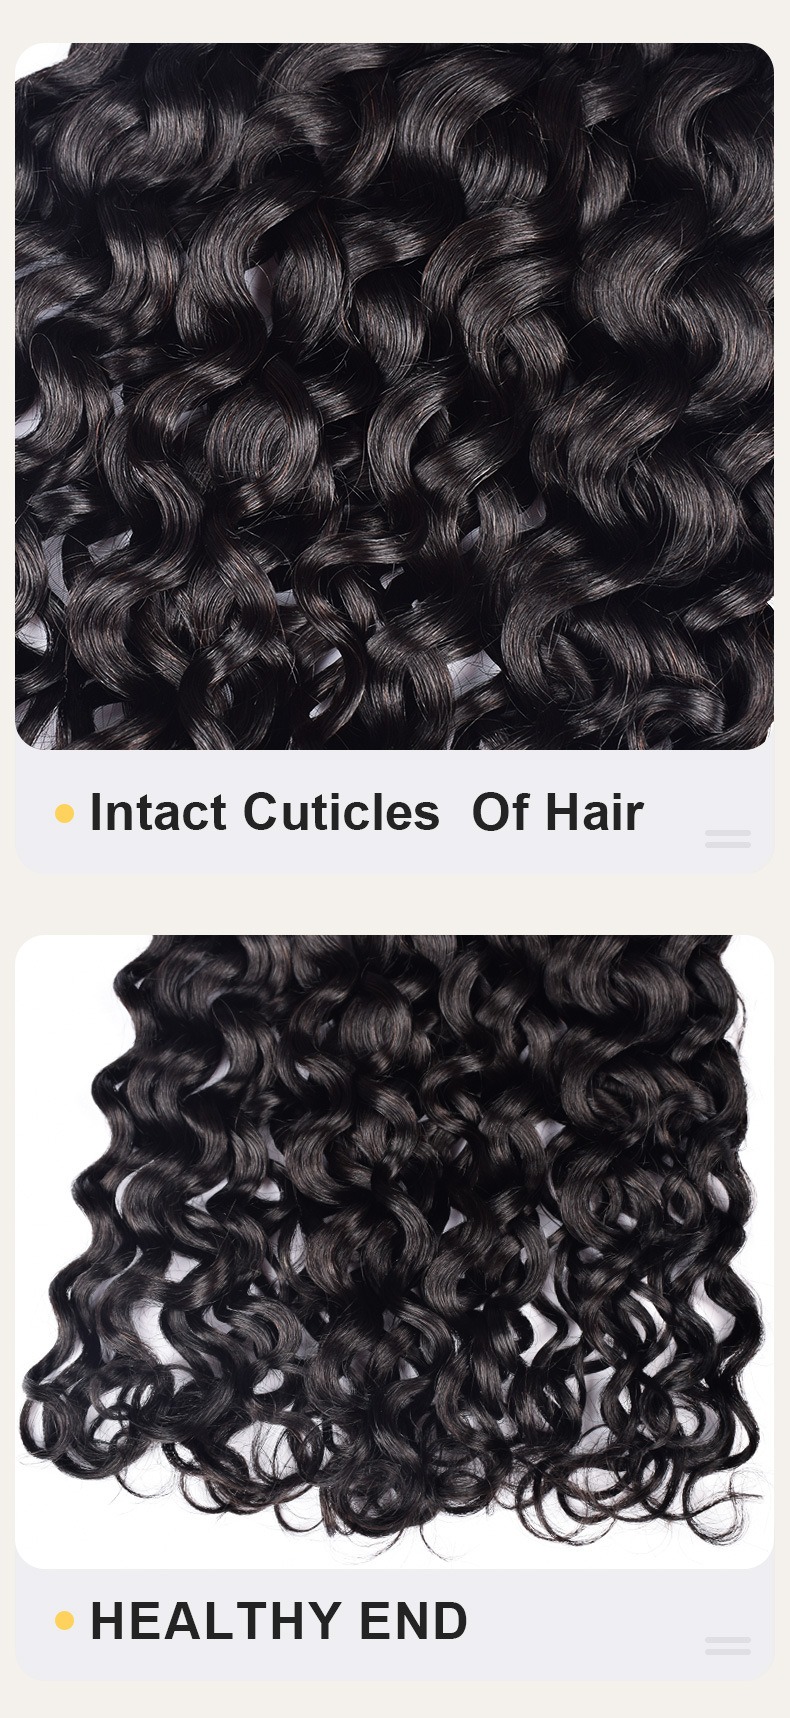 Transform your look with our real human hair extensions, featuring Italian curly styling for bulk hair